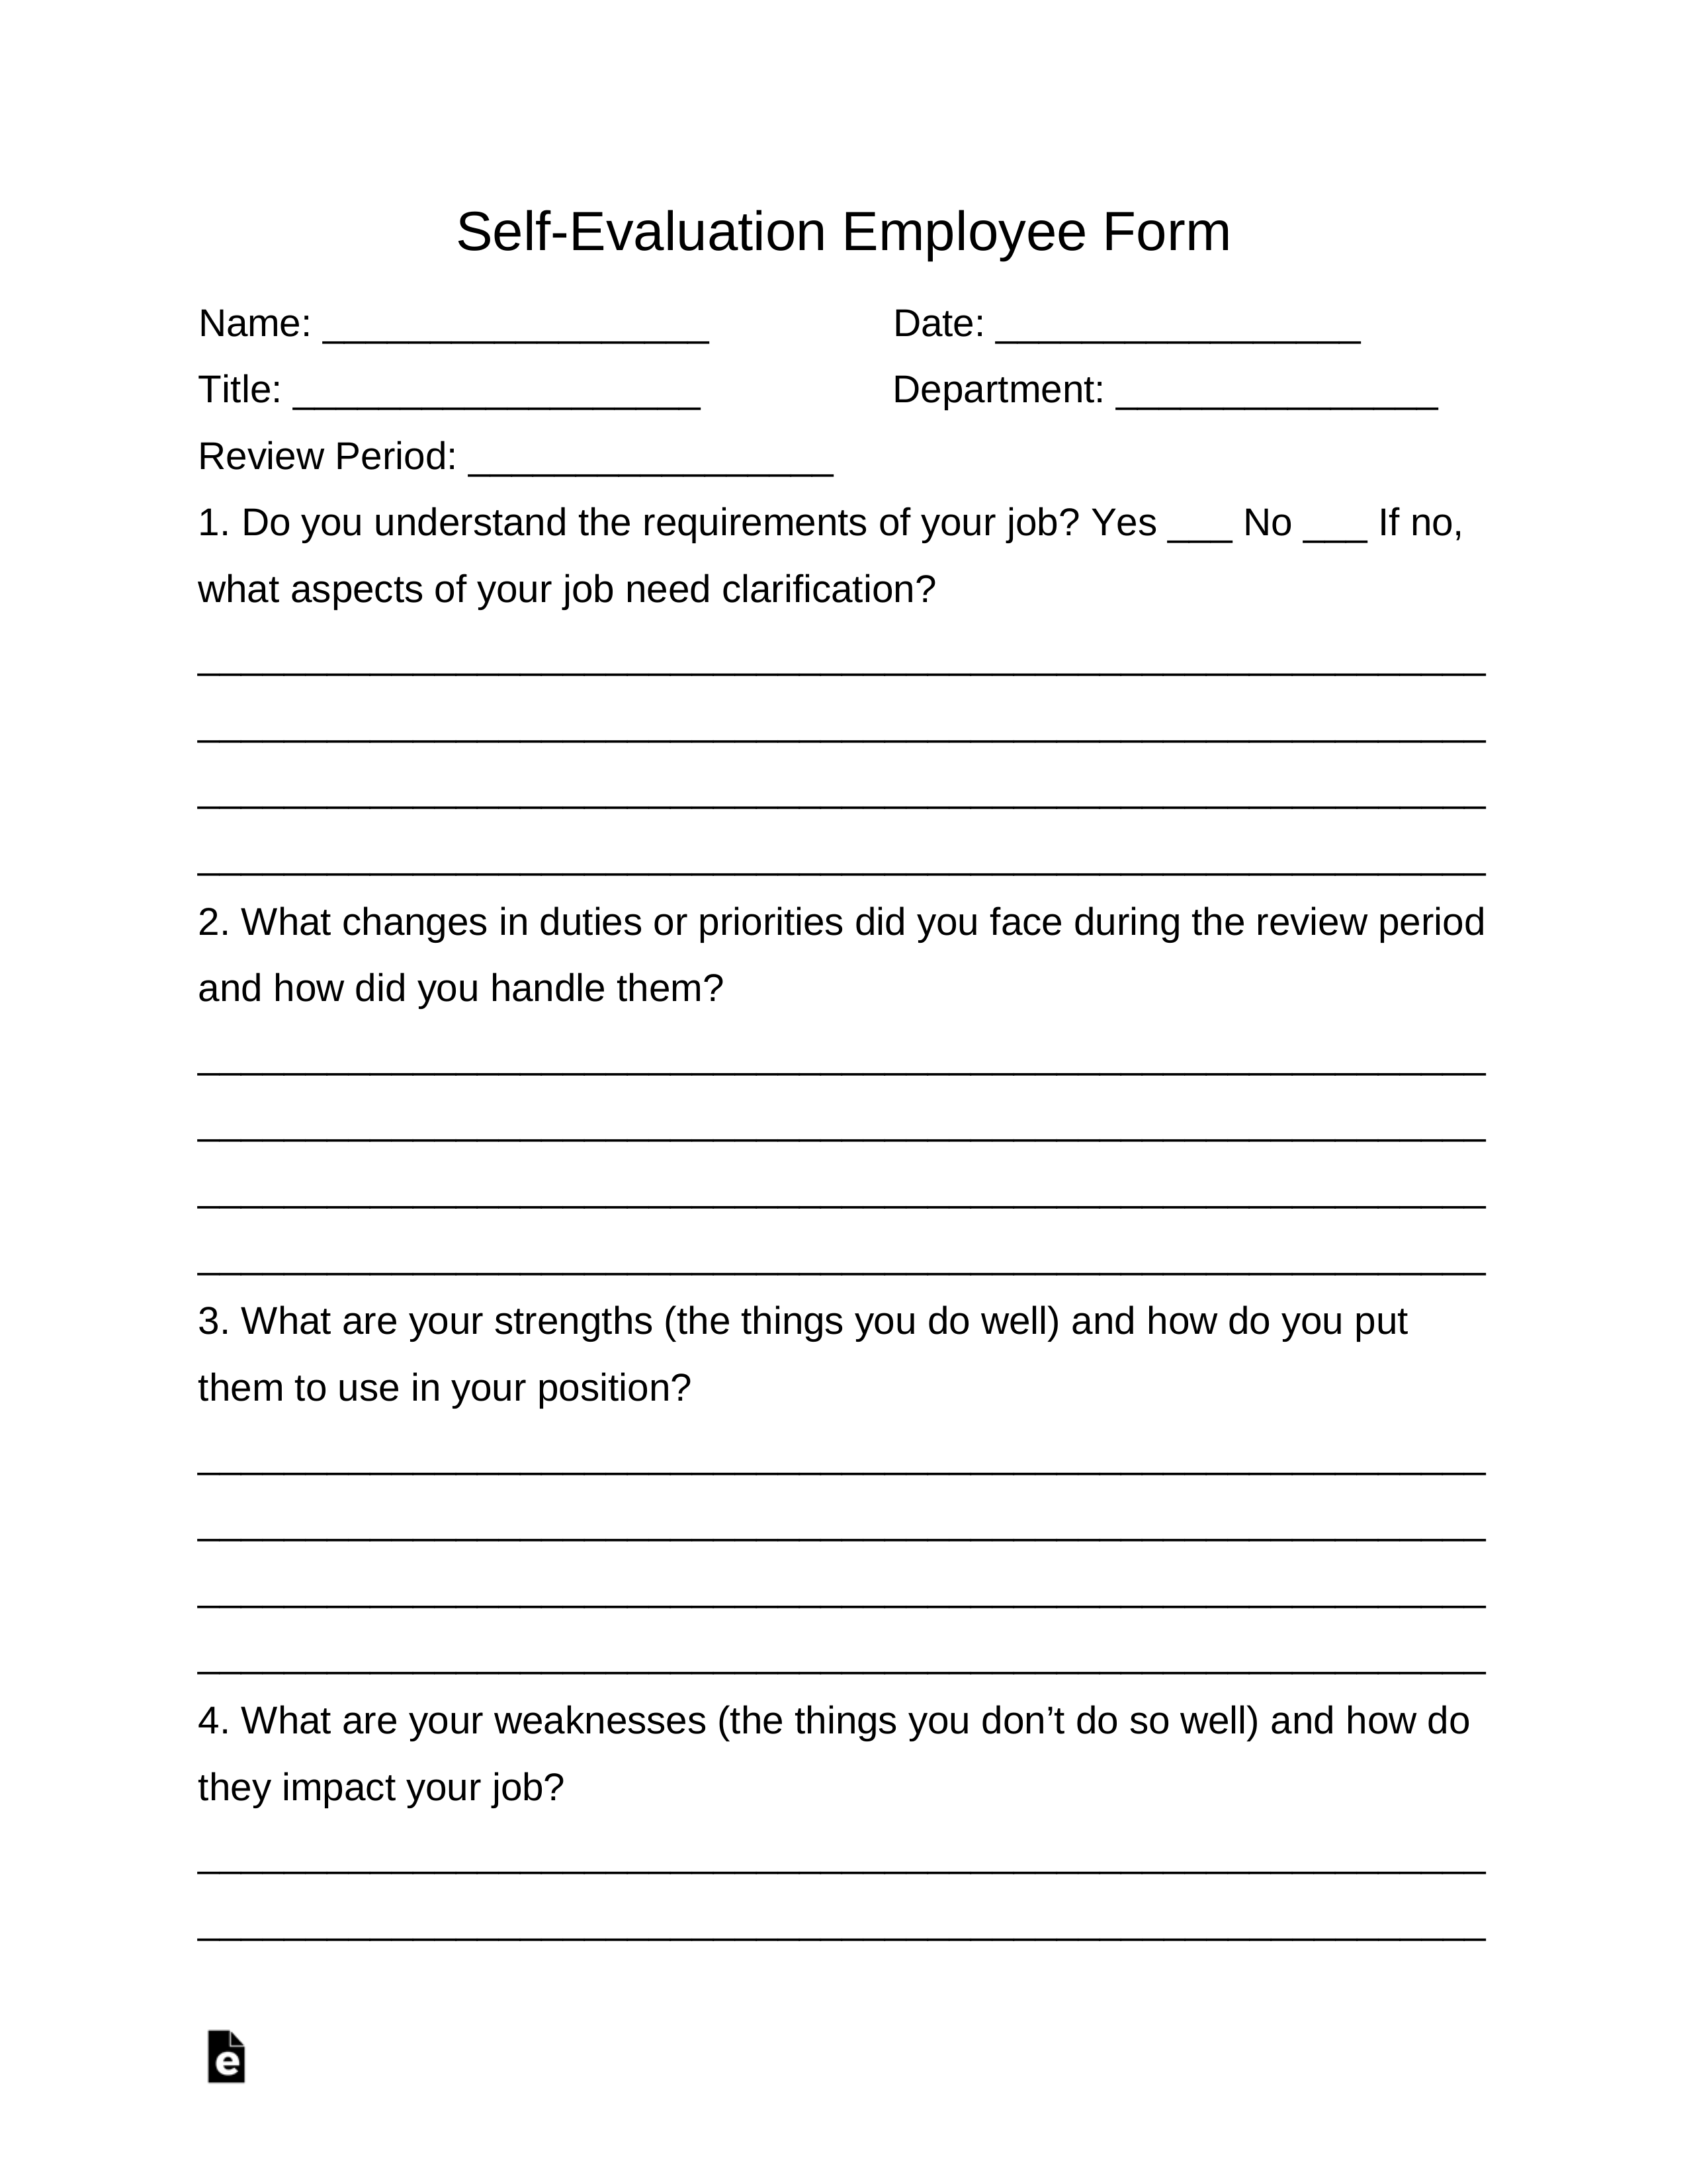 template-printable-employee-evaluation-form-printable-forms-free-online